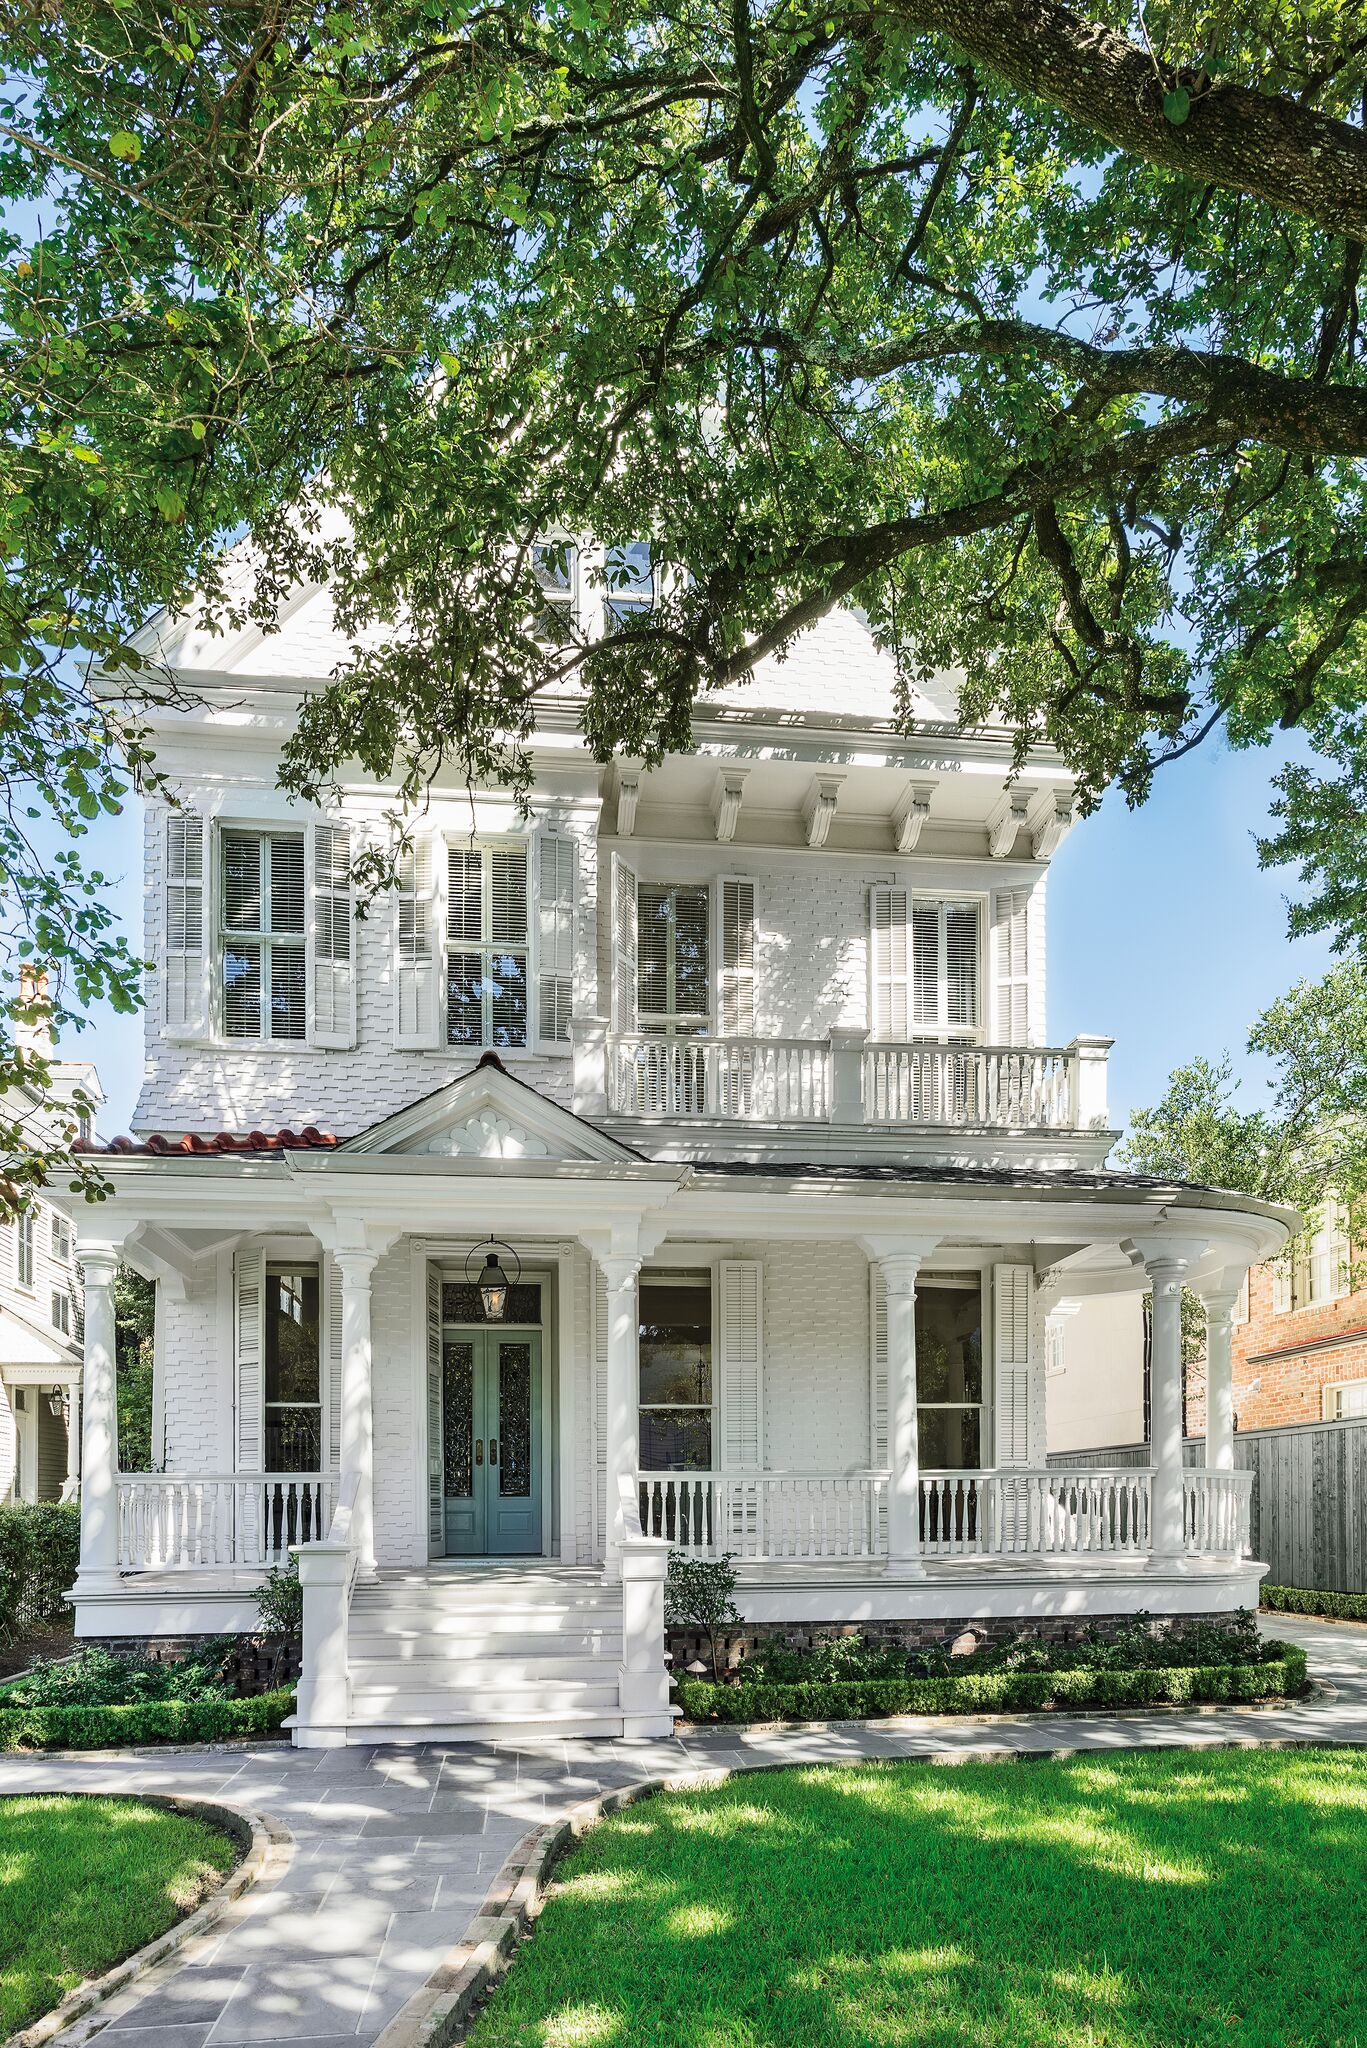 Stately white painted Victorian home has breathtaking architecture and curb appeal in the lower Garden District of New Orleans. #houseexterior #victorianhouses #beautifulwhitehouse #historichome #curbappeal #frontporch